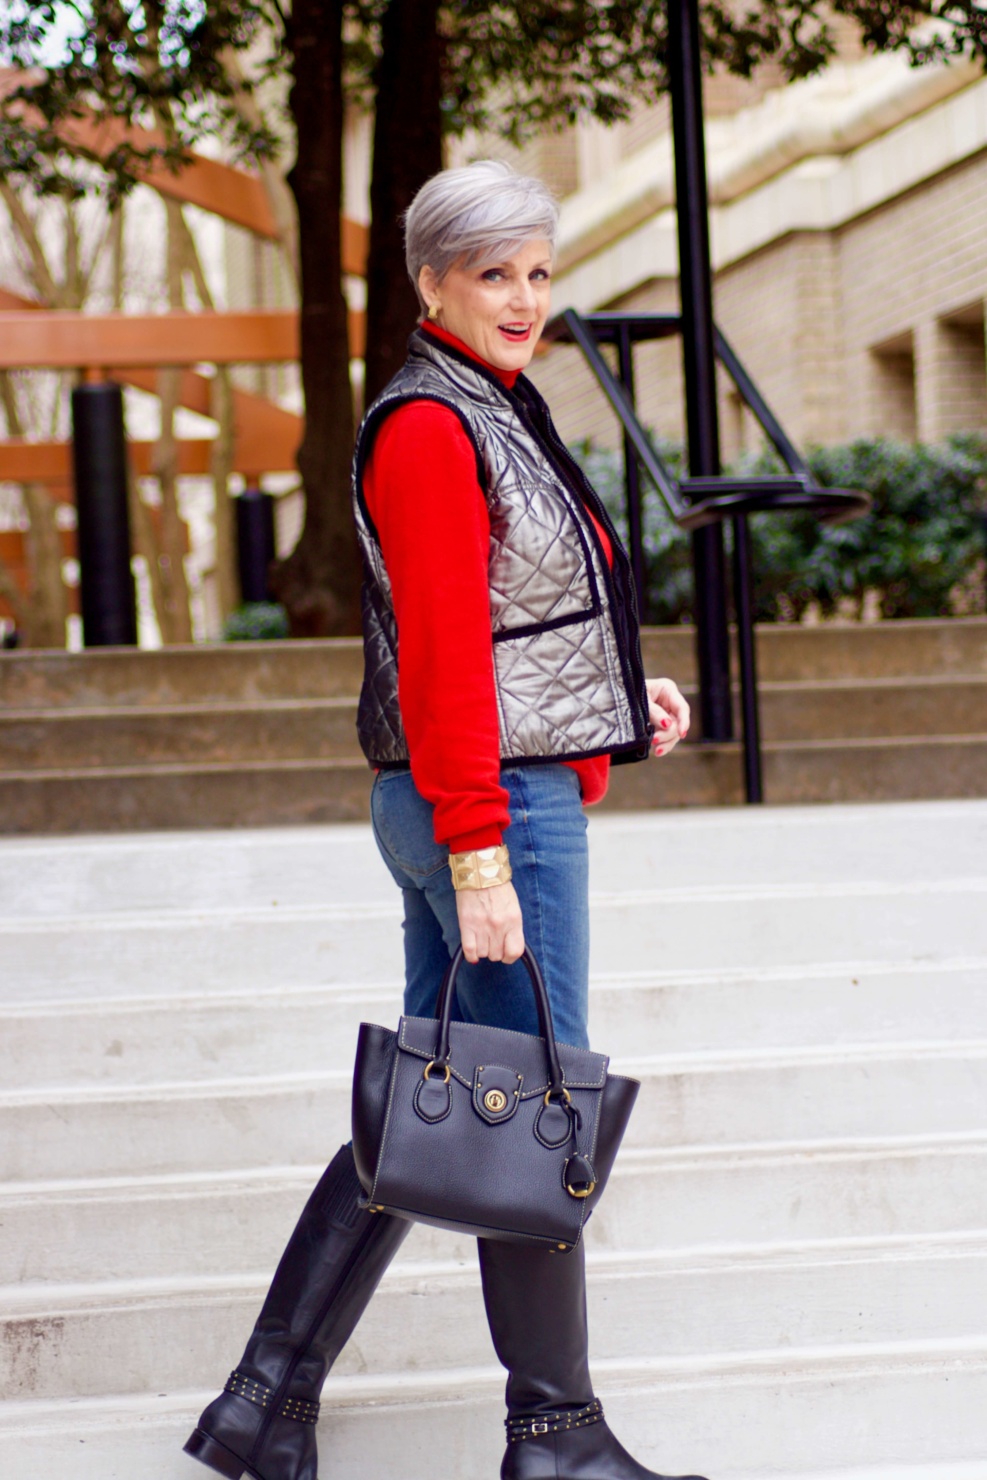 beth from Style at a Certain Age wears five classic winter essentials